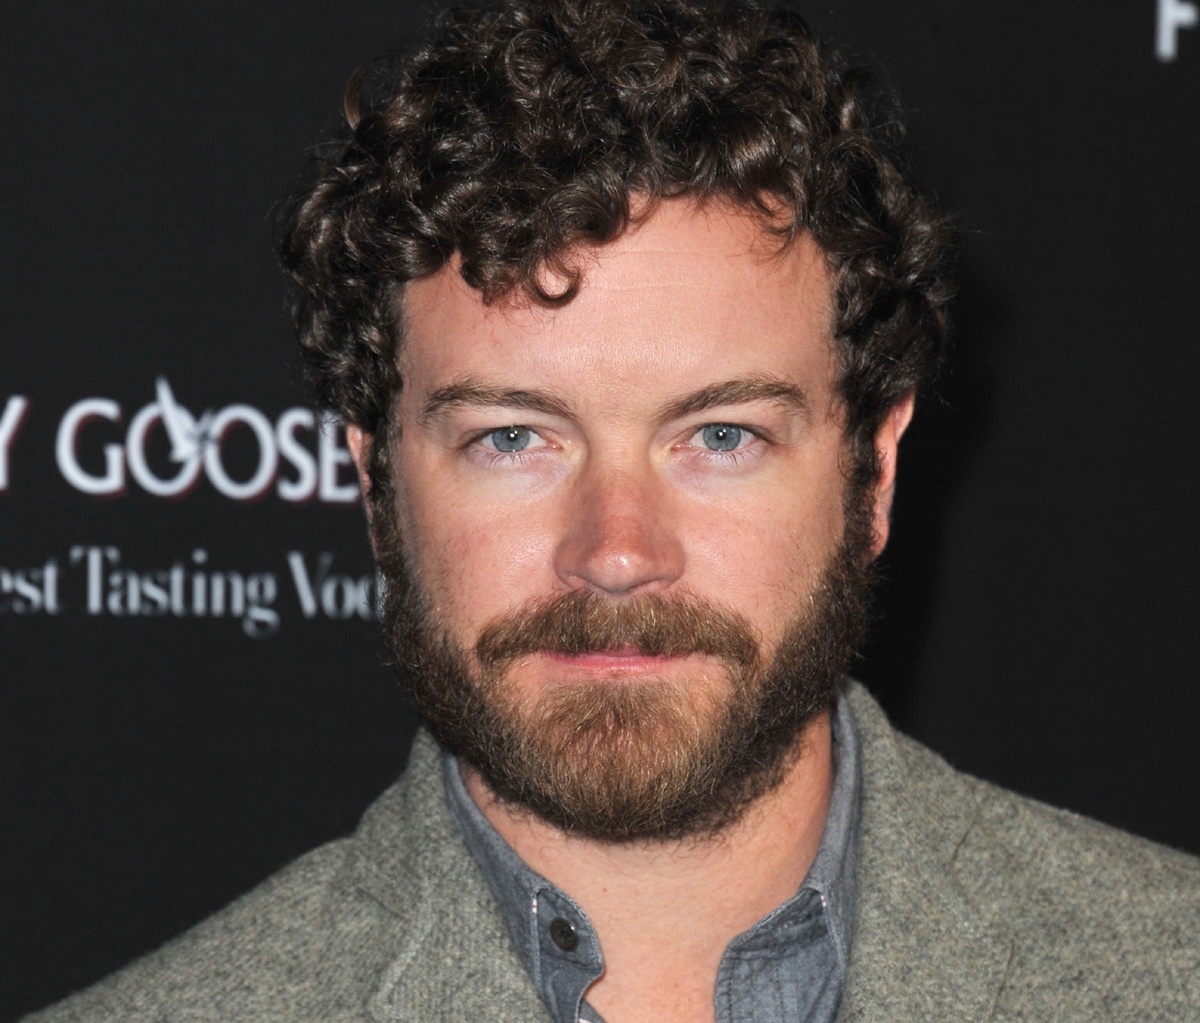 Rape: Danny Masterson confirmed as perpetrator in two cases